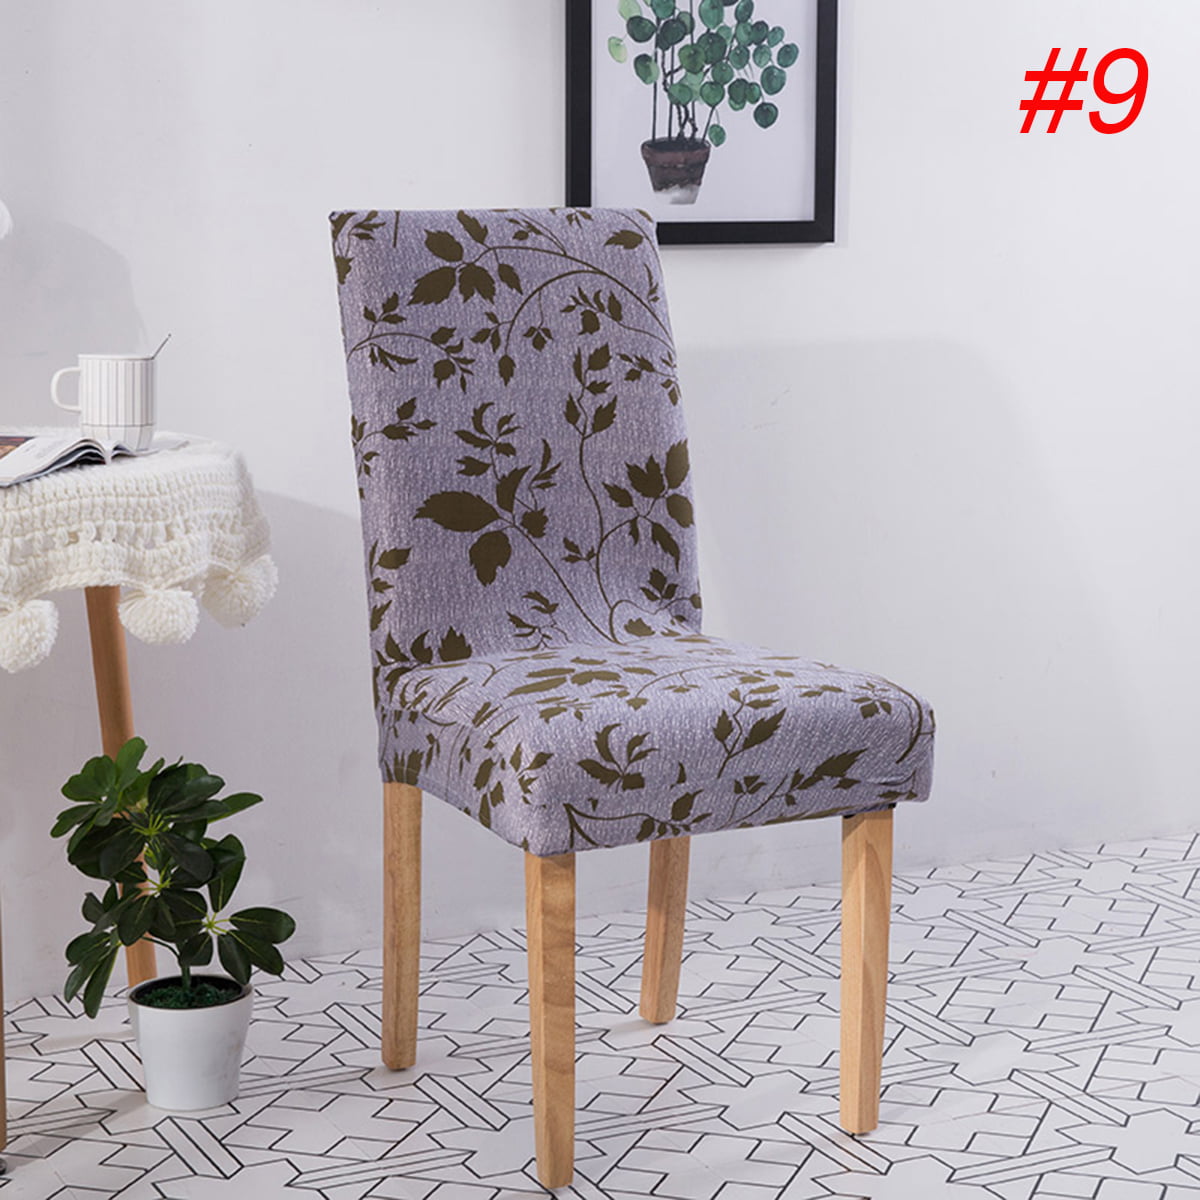 Home Removable Floral Dining Room Chair Covers Wedding Stretch Seat Cover New 